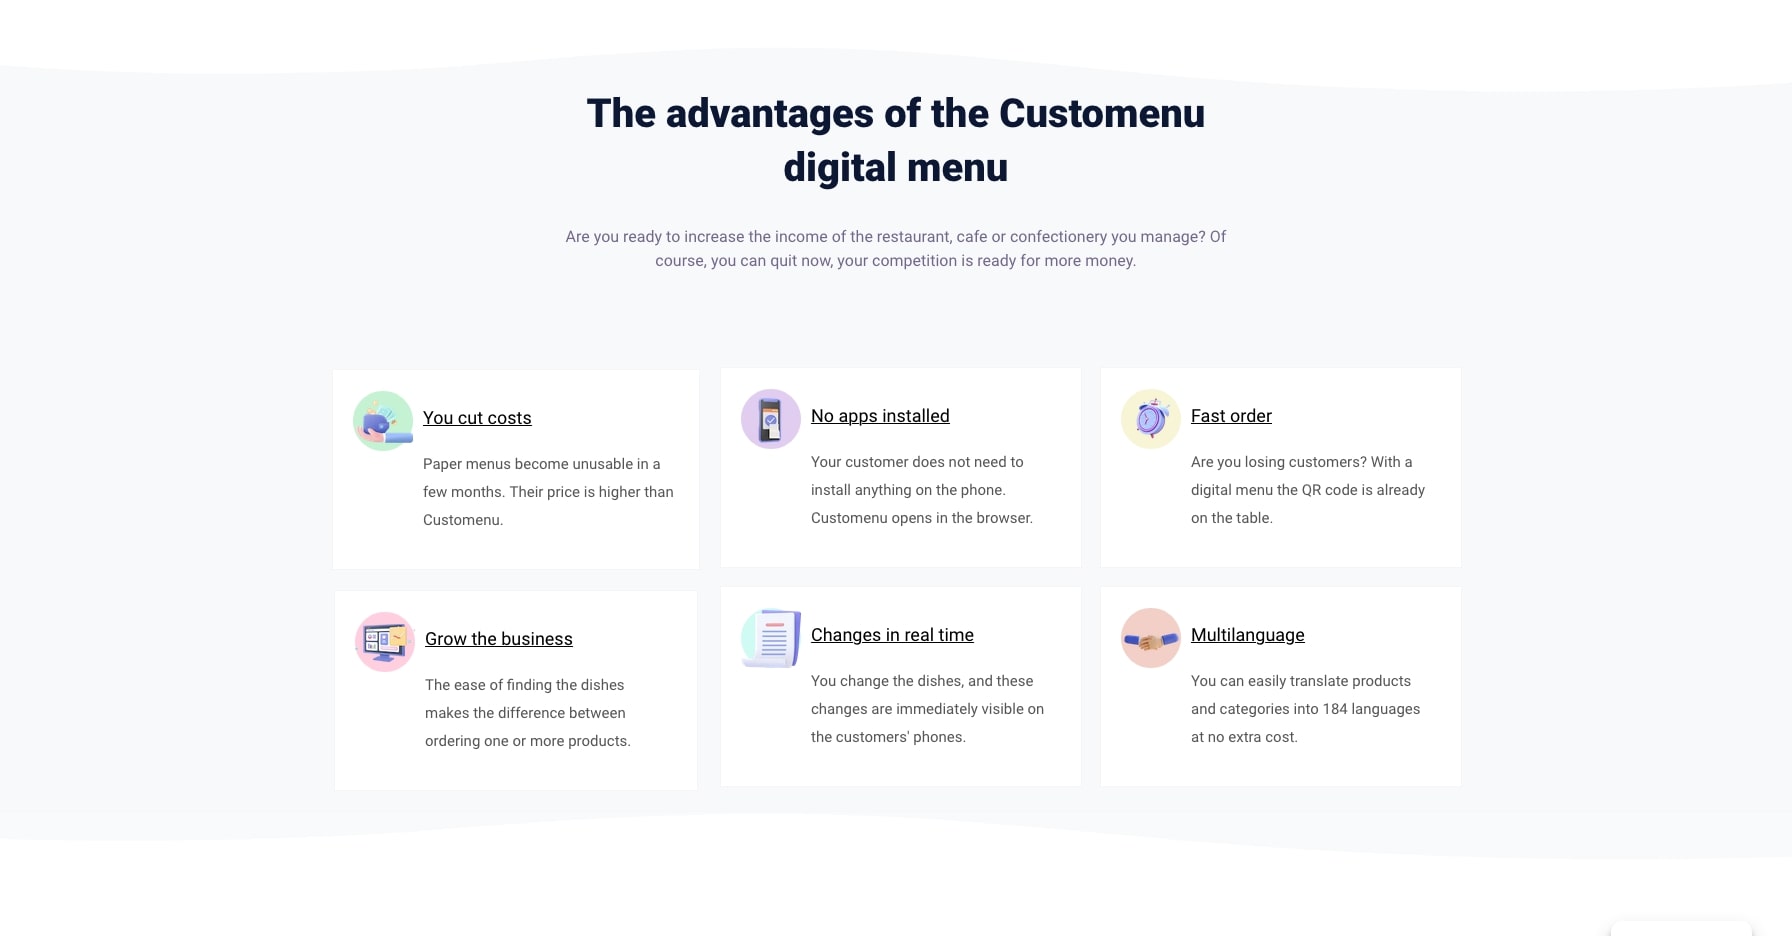 To understand what are the benefits of operating a digital menu for restaurants, we chose to display the most important advantages.